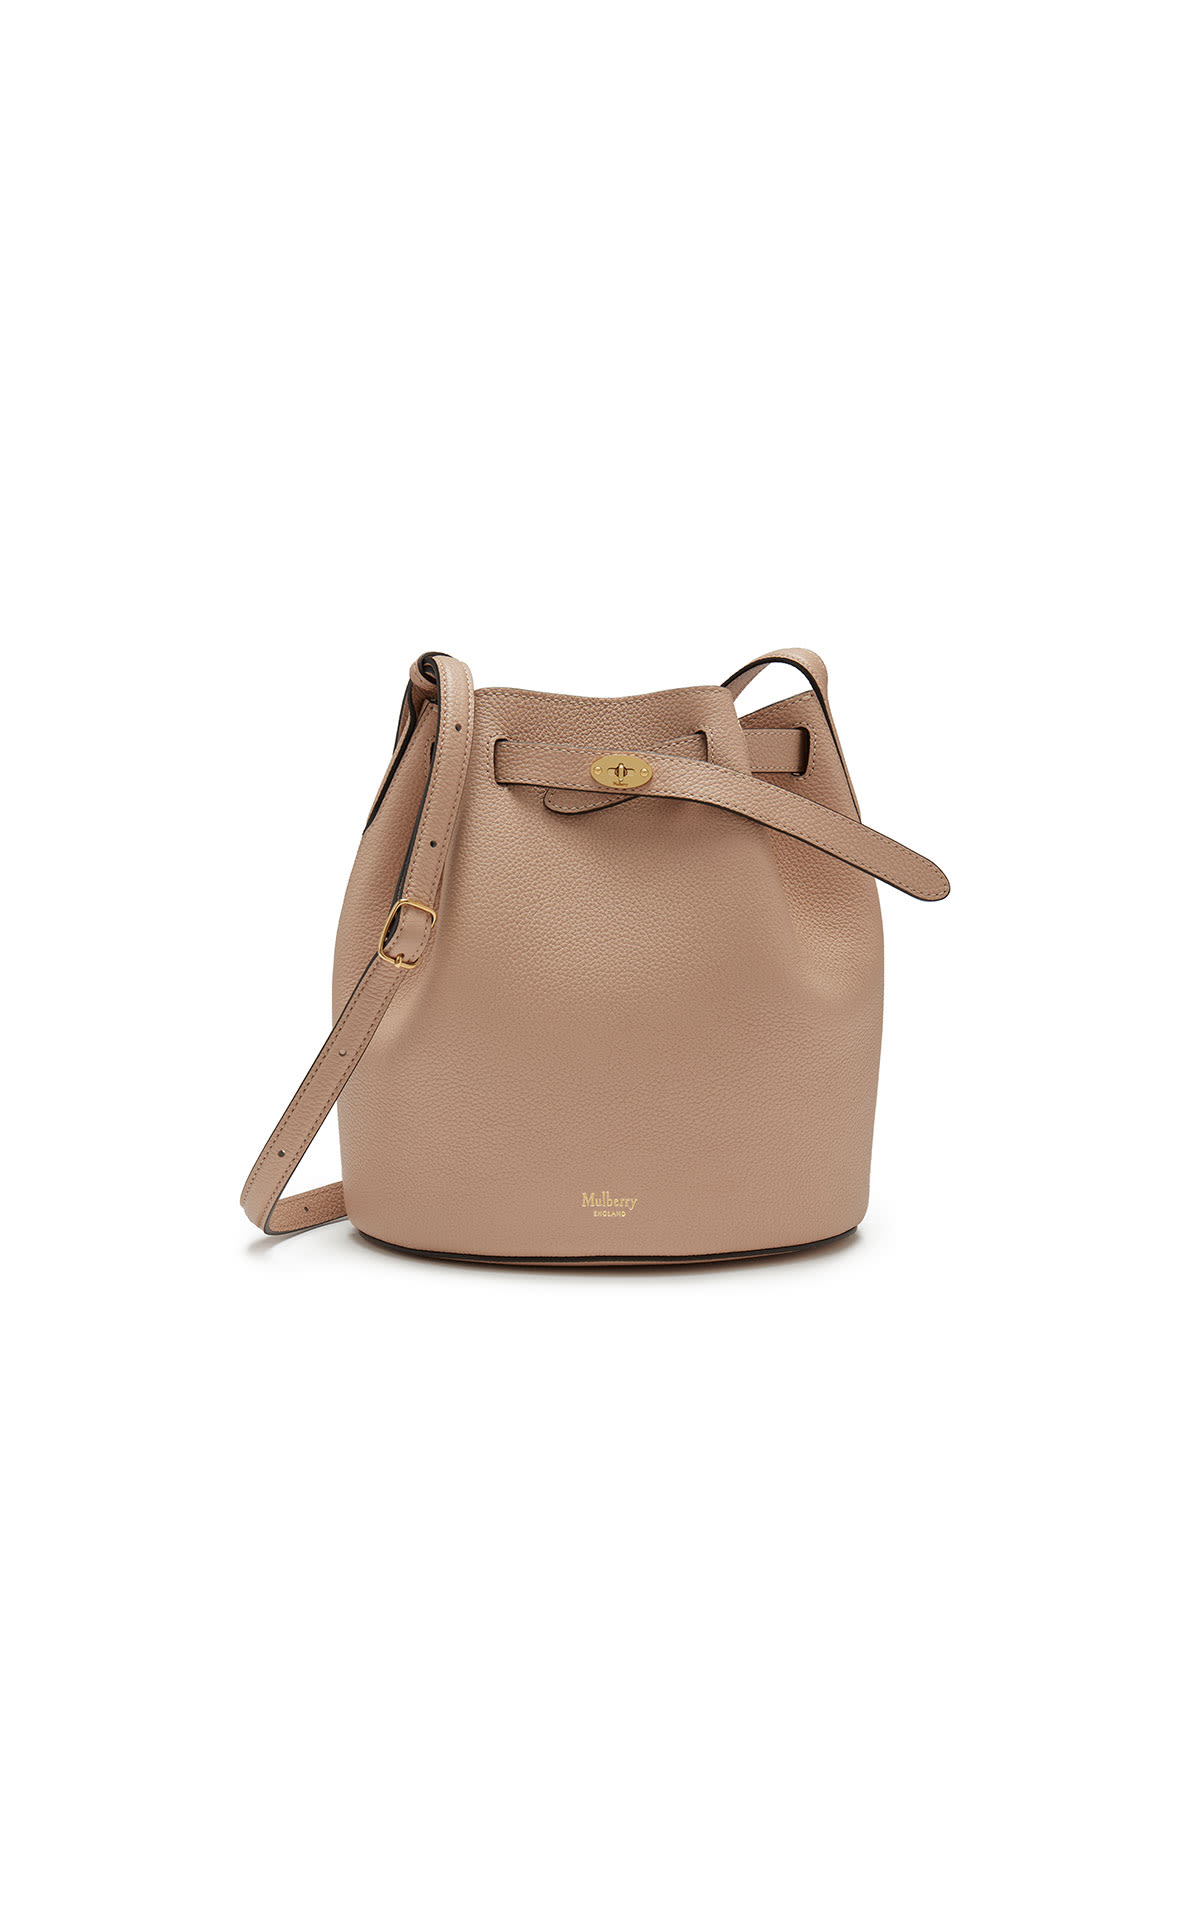 Mulberry Abbey classic grain rosewater from Bicester Village